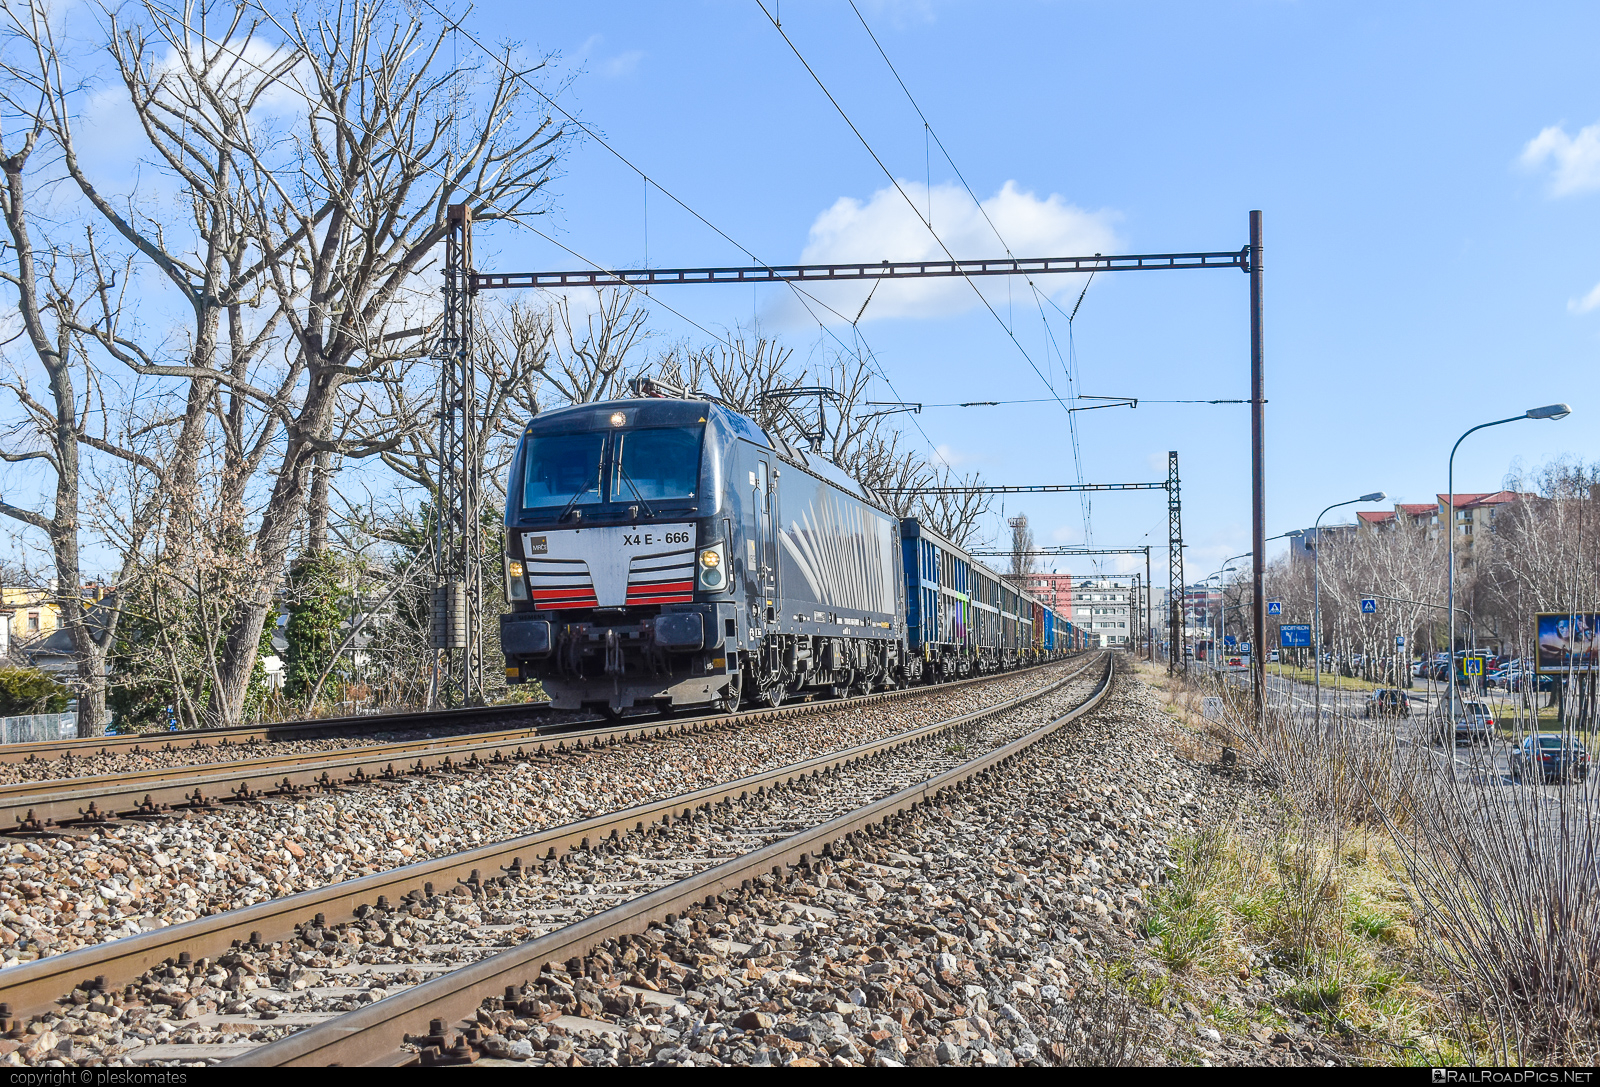 Siemens Vectron MS - 193 666 operated by LTE Logistik und Transport GmbH #dispolok #lokomotion #lte #ltelogistikundtransport #ltelogistikundtransportgmbh #mitsuirailcapitaleurope #mitsuirailcapitaleuropegmbh #mrce #openwagon #siemens #siemensVectron #siemensVectronMS #vectron #vectronMS